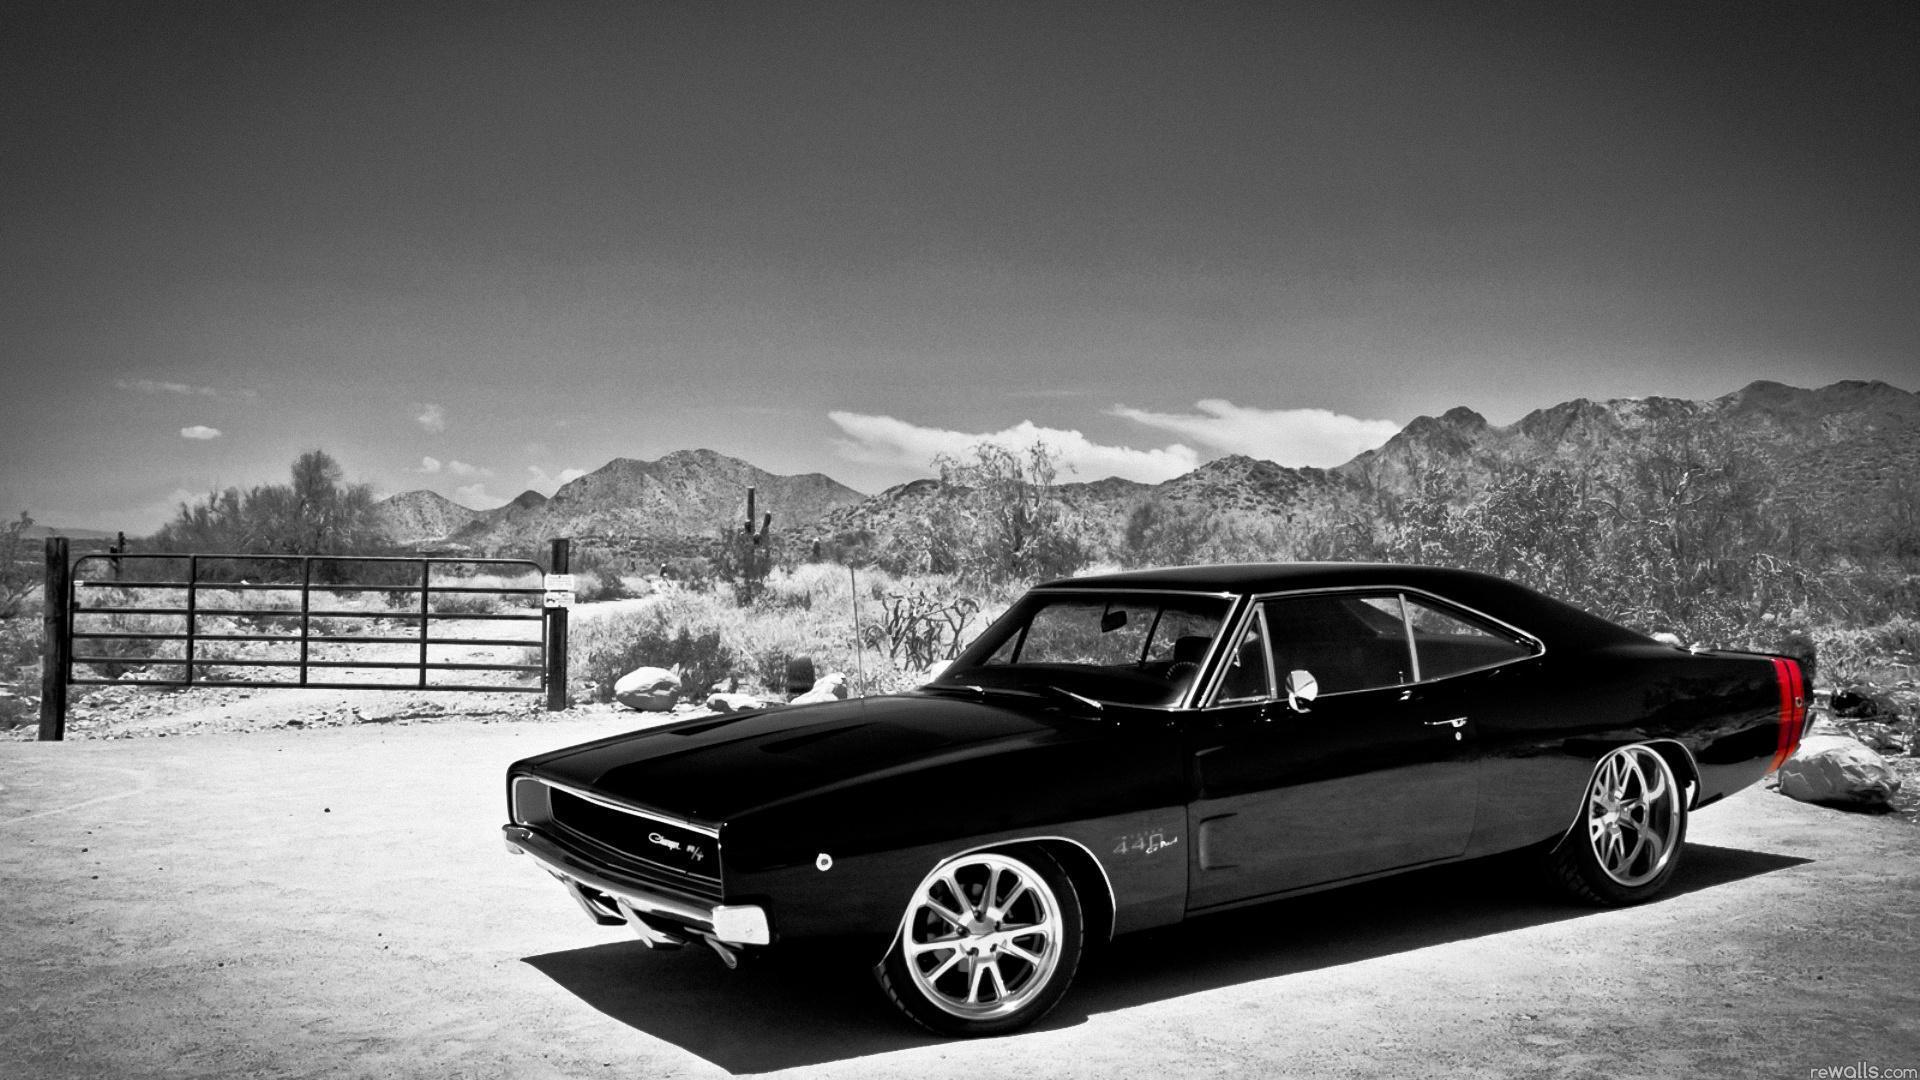 Old Muscle Car Wallpapers - Wallpaper Cave Muscle Car Wallpaper 1920x1080